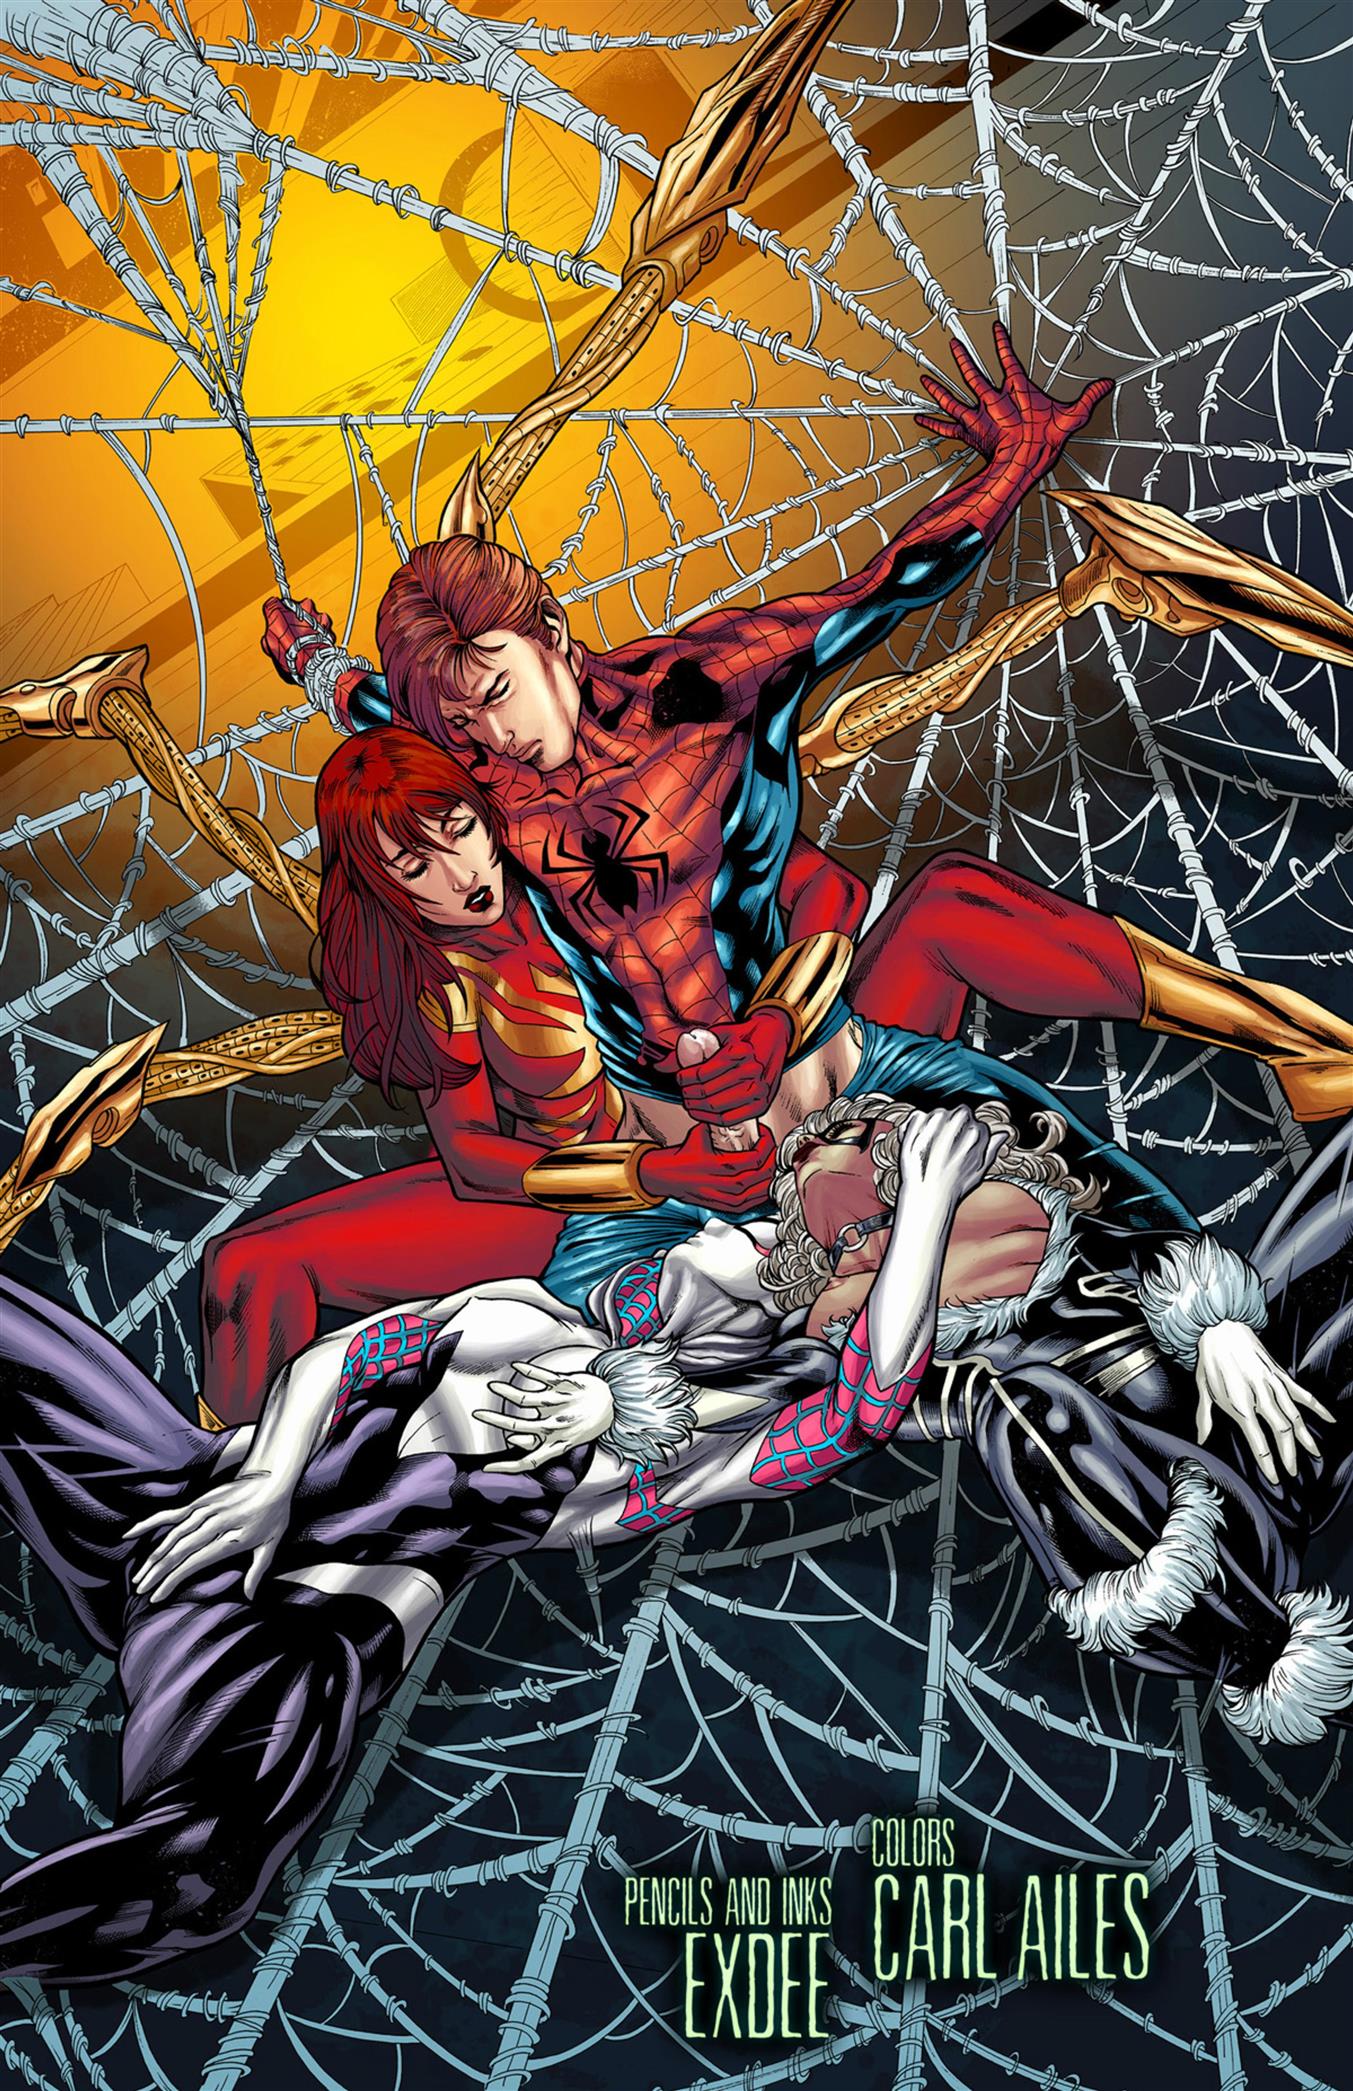 Trifecta (Spider-Man) [Tracy Scops]